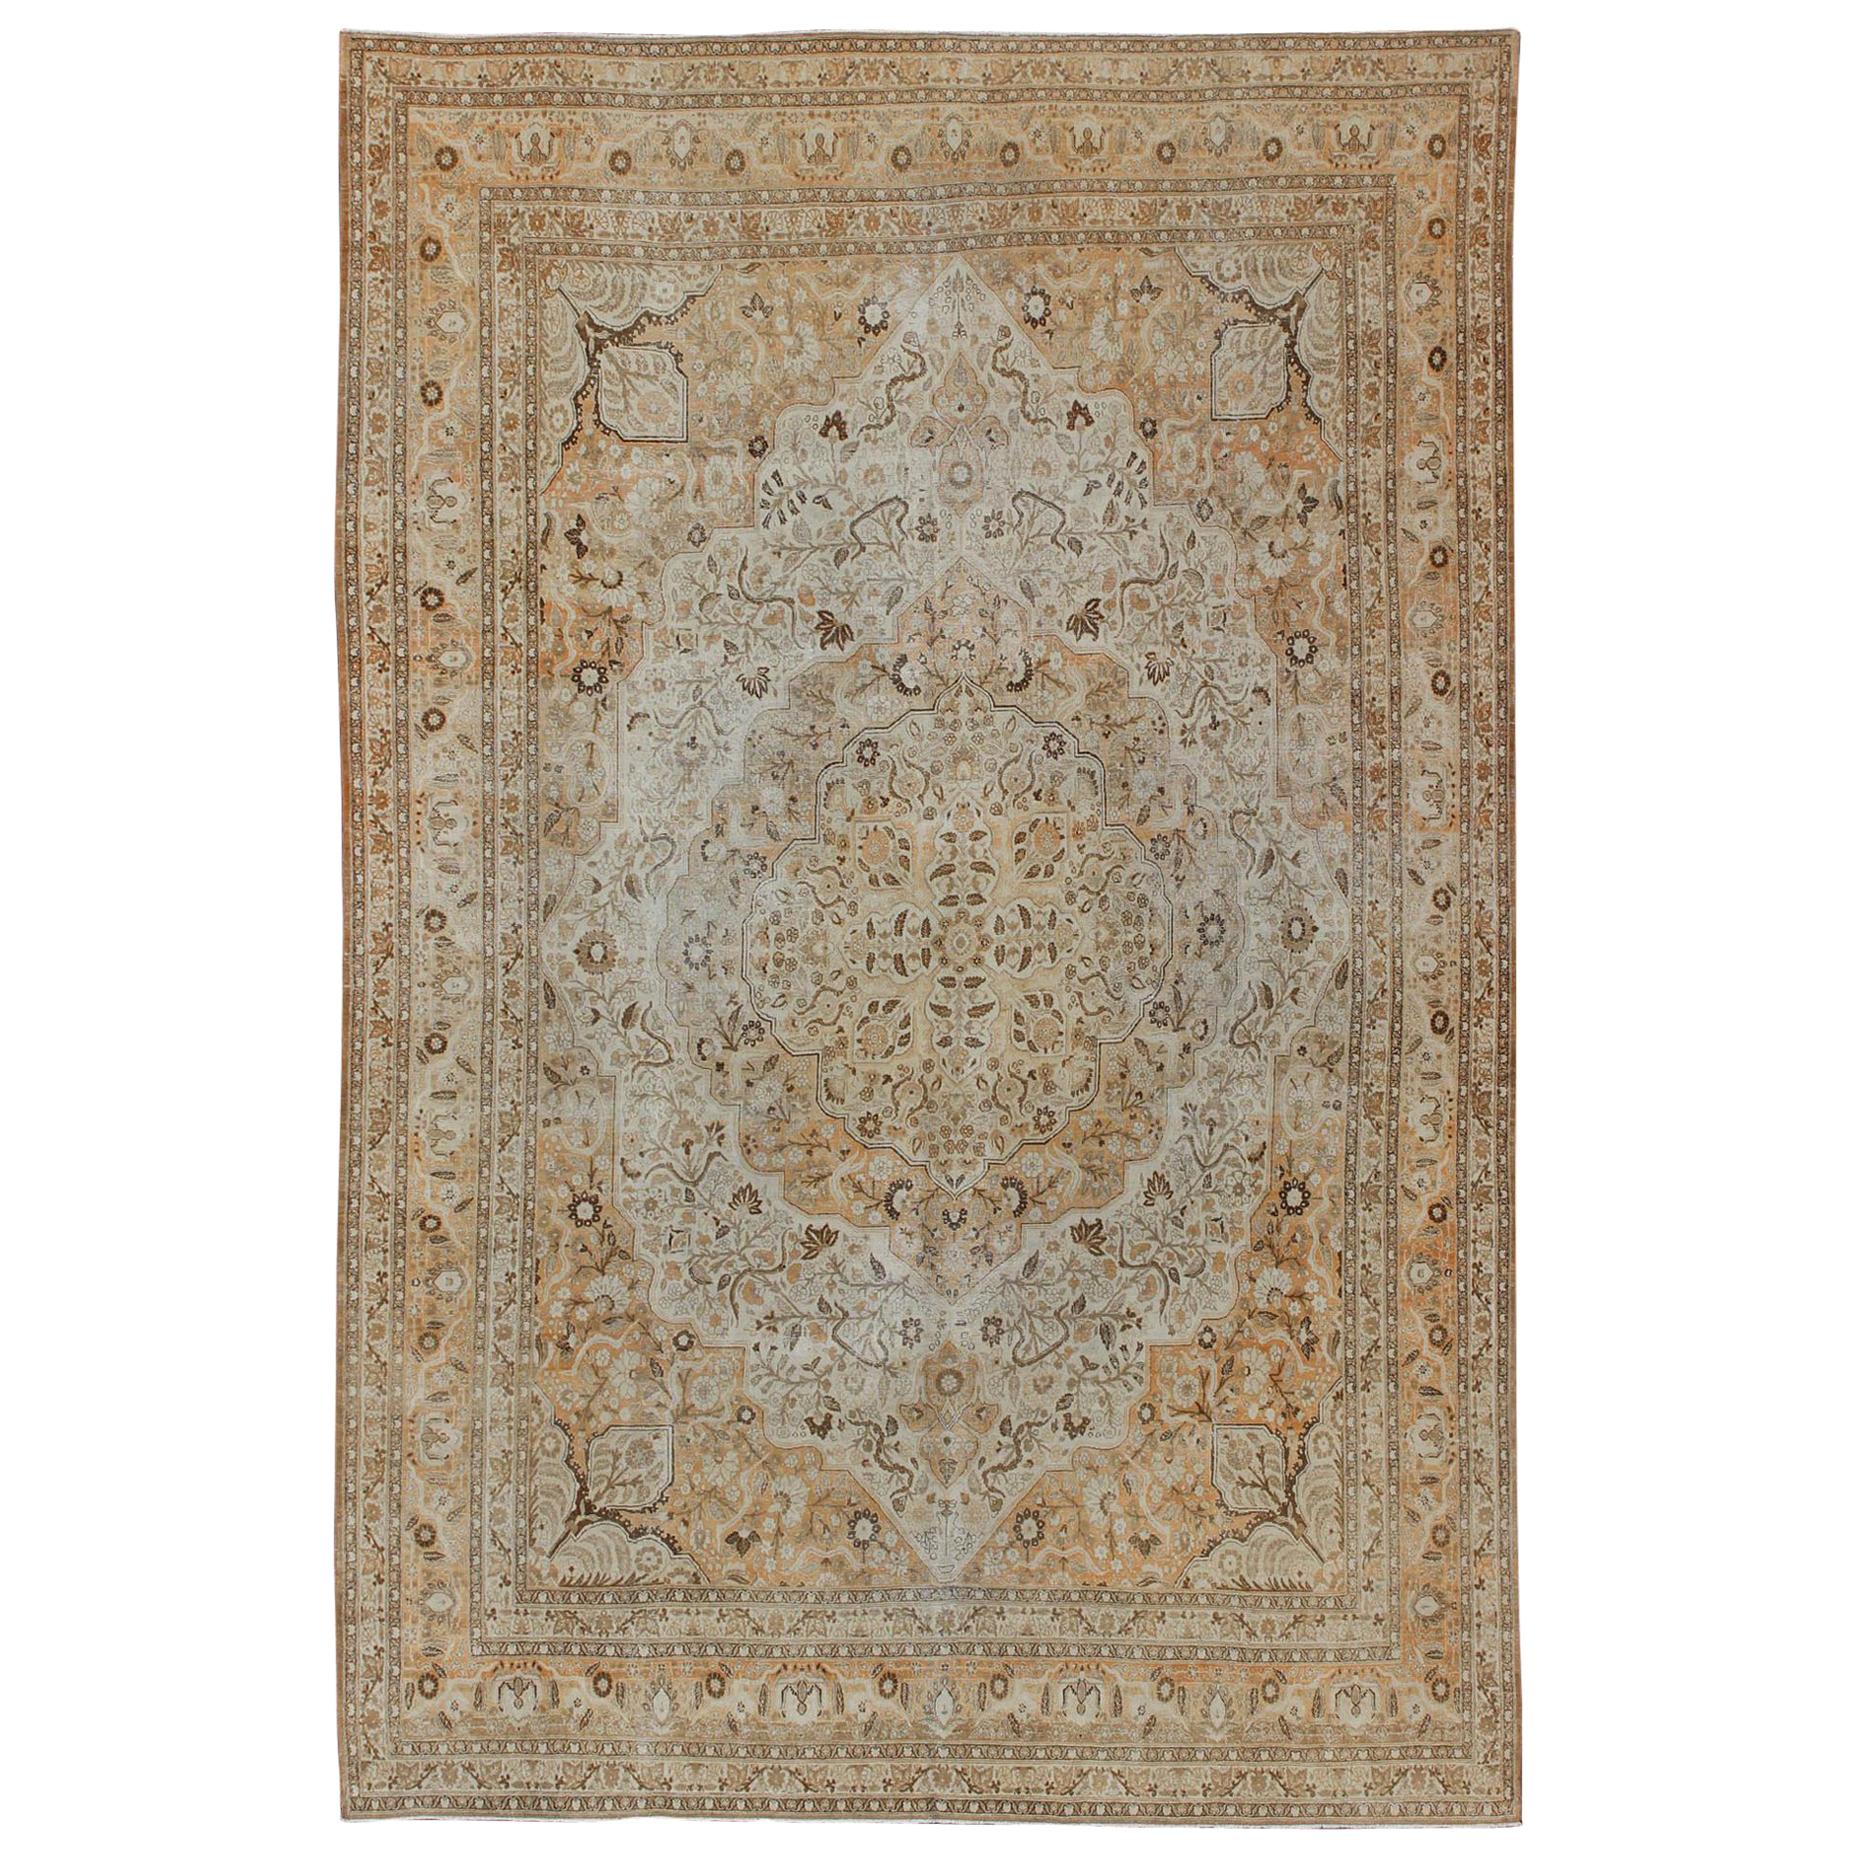 Antique Persian Tabriz Rug with Layered Medallion in Light Copper, Brown & Cream